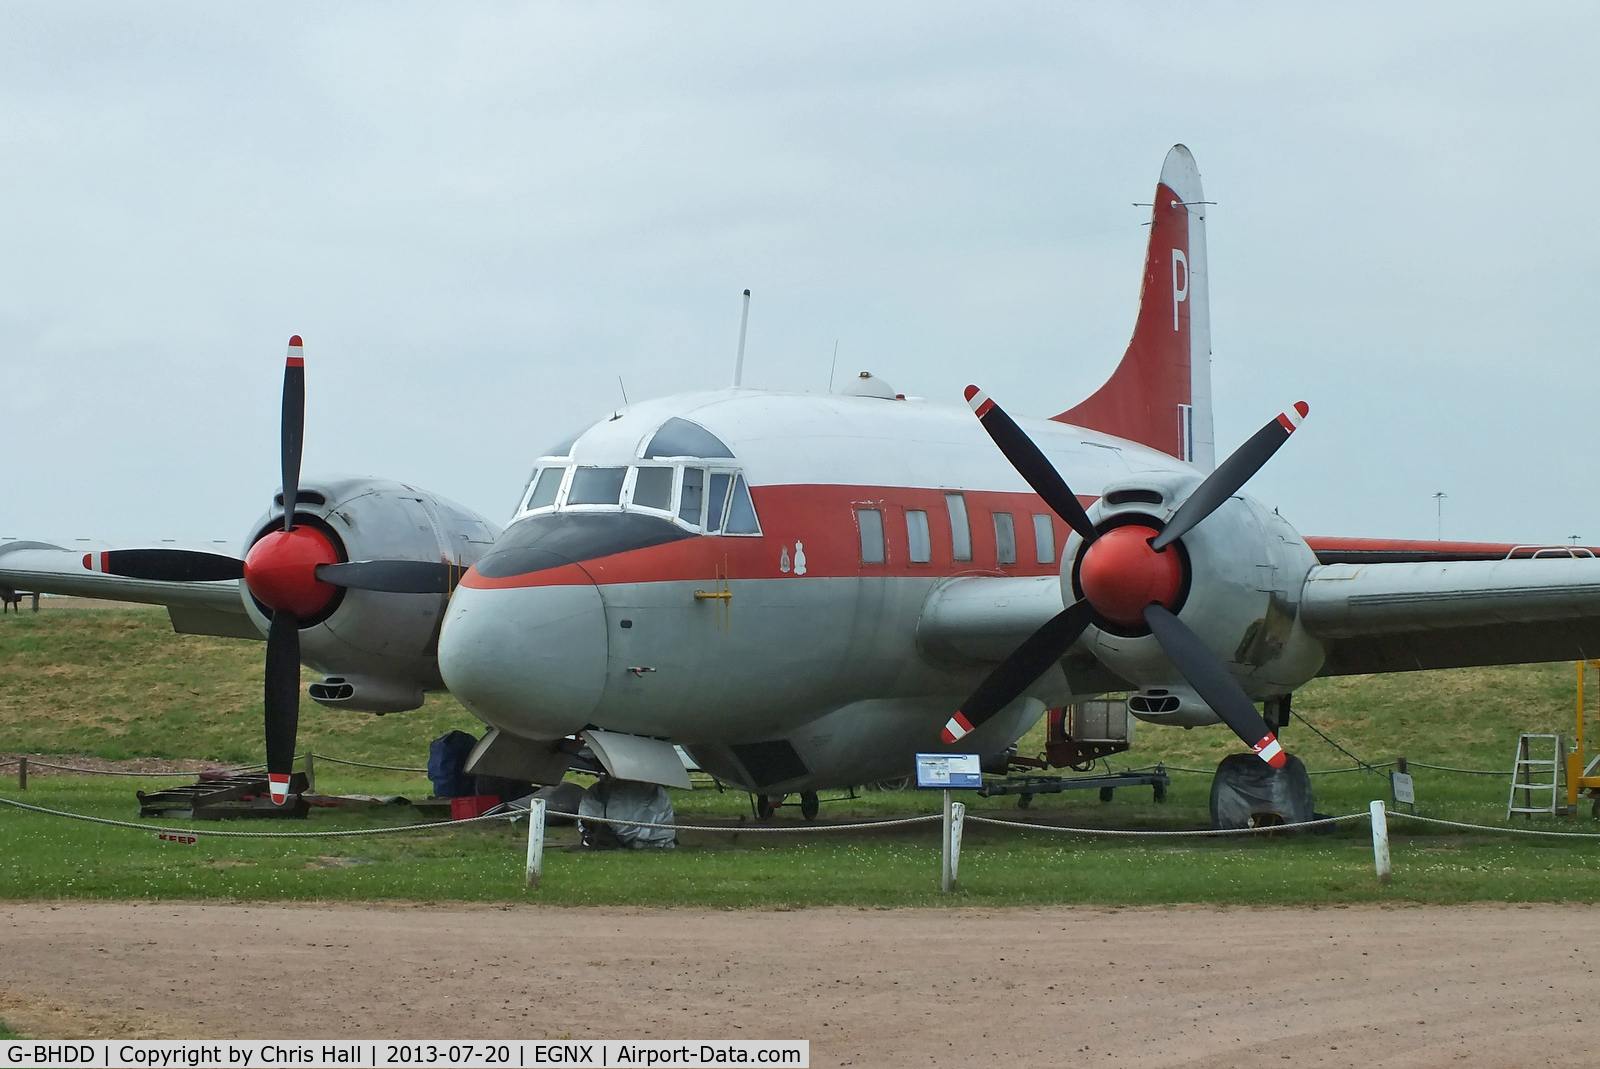 G-BHDD, 1953 Vickers Varsity T.1 C/N Not found WL626/G-BHDD, Preserved at the East Midlands Aeropark